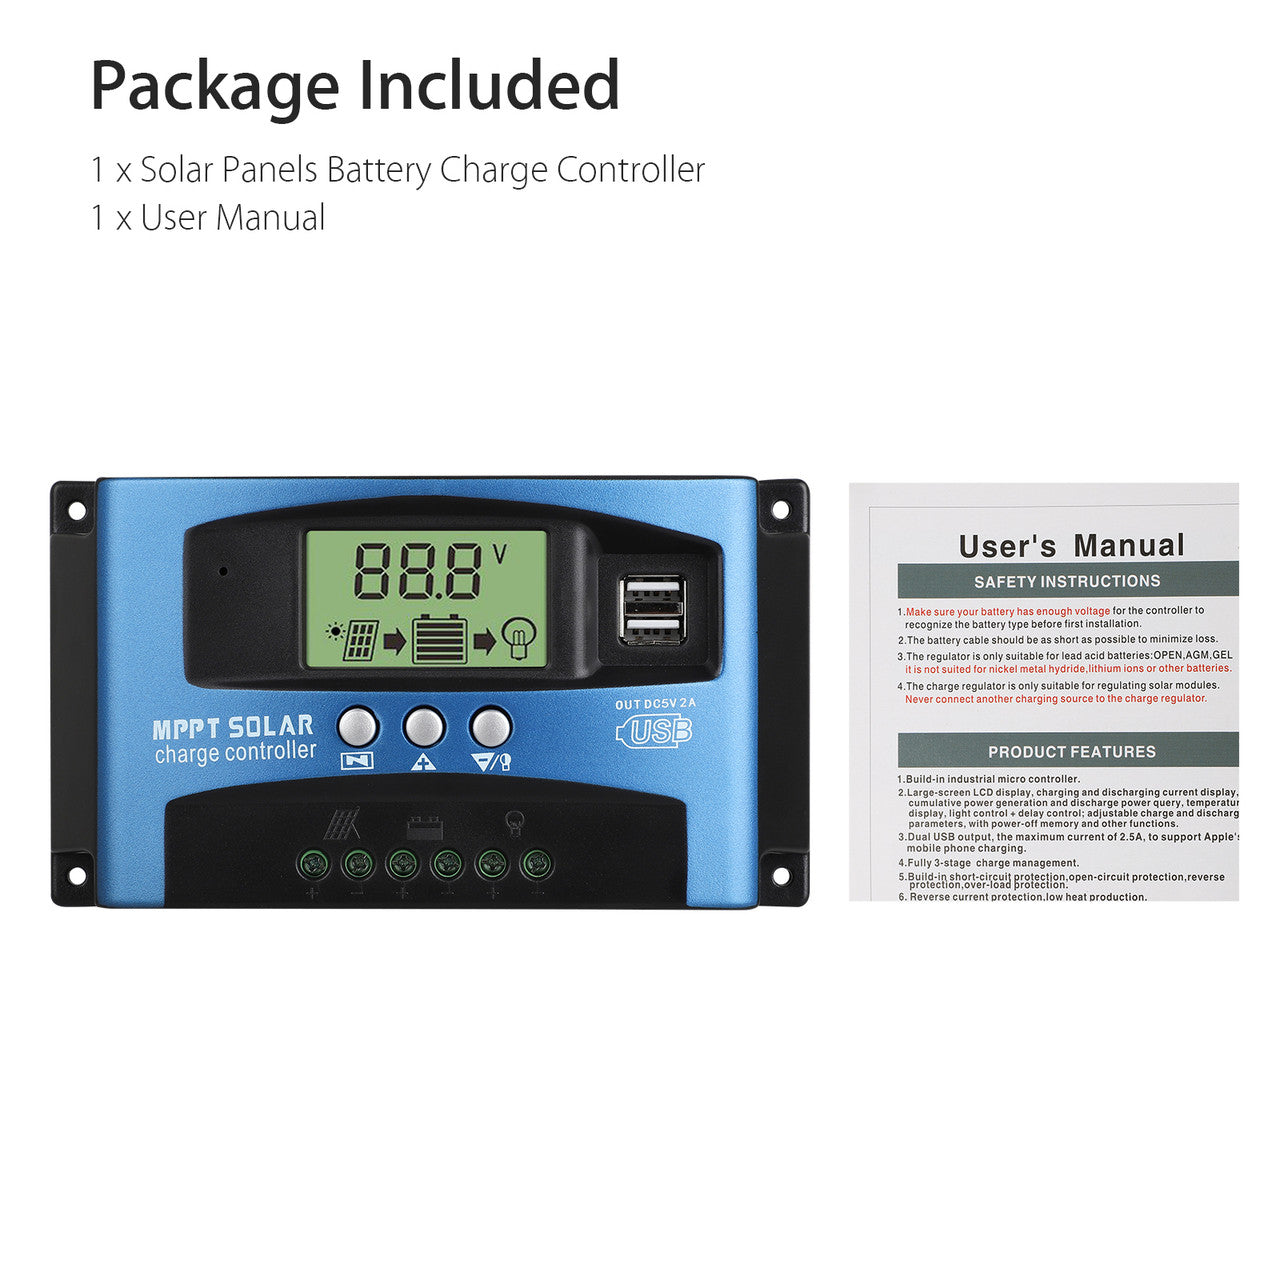 MPPT Solar Charge Controller 100A Solar Panel Controller,Automatic focusing MPPT tracking charging,Large-screen LCD display,SOC function,control charge current & supply power to the loads